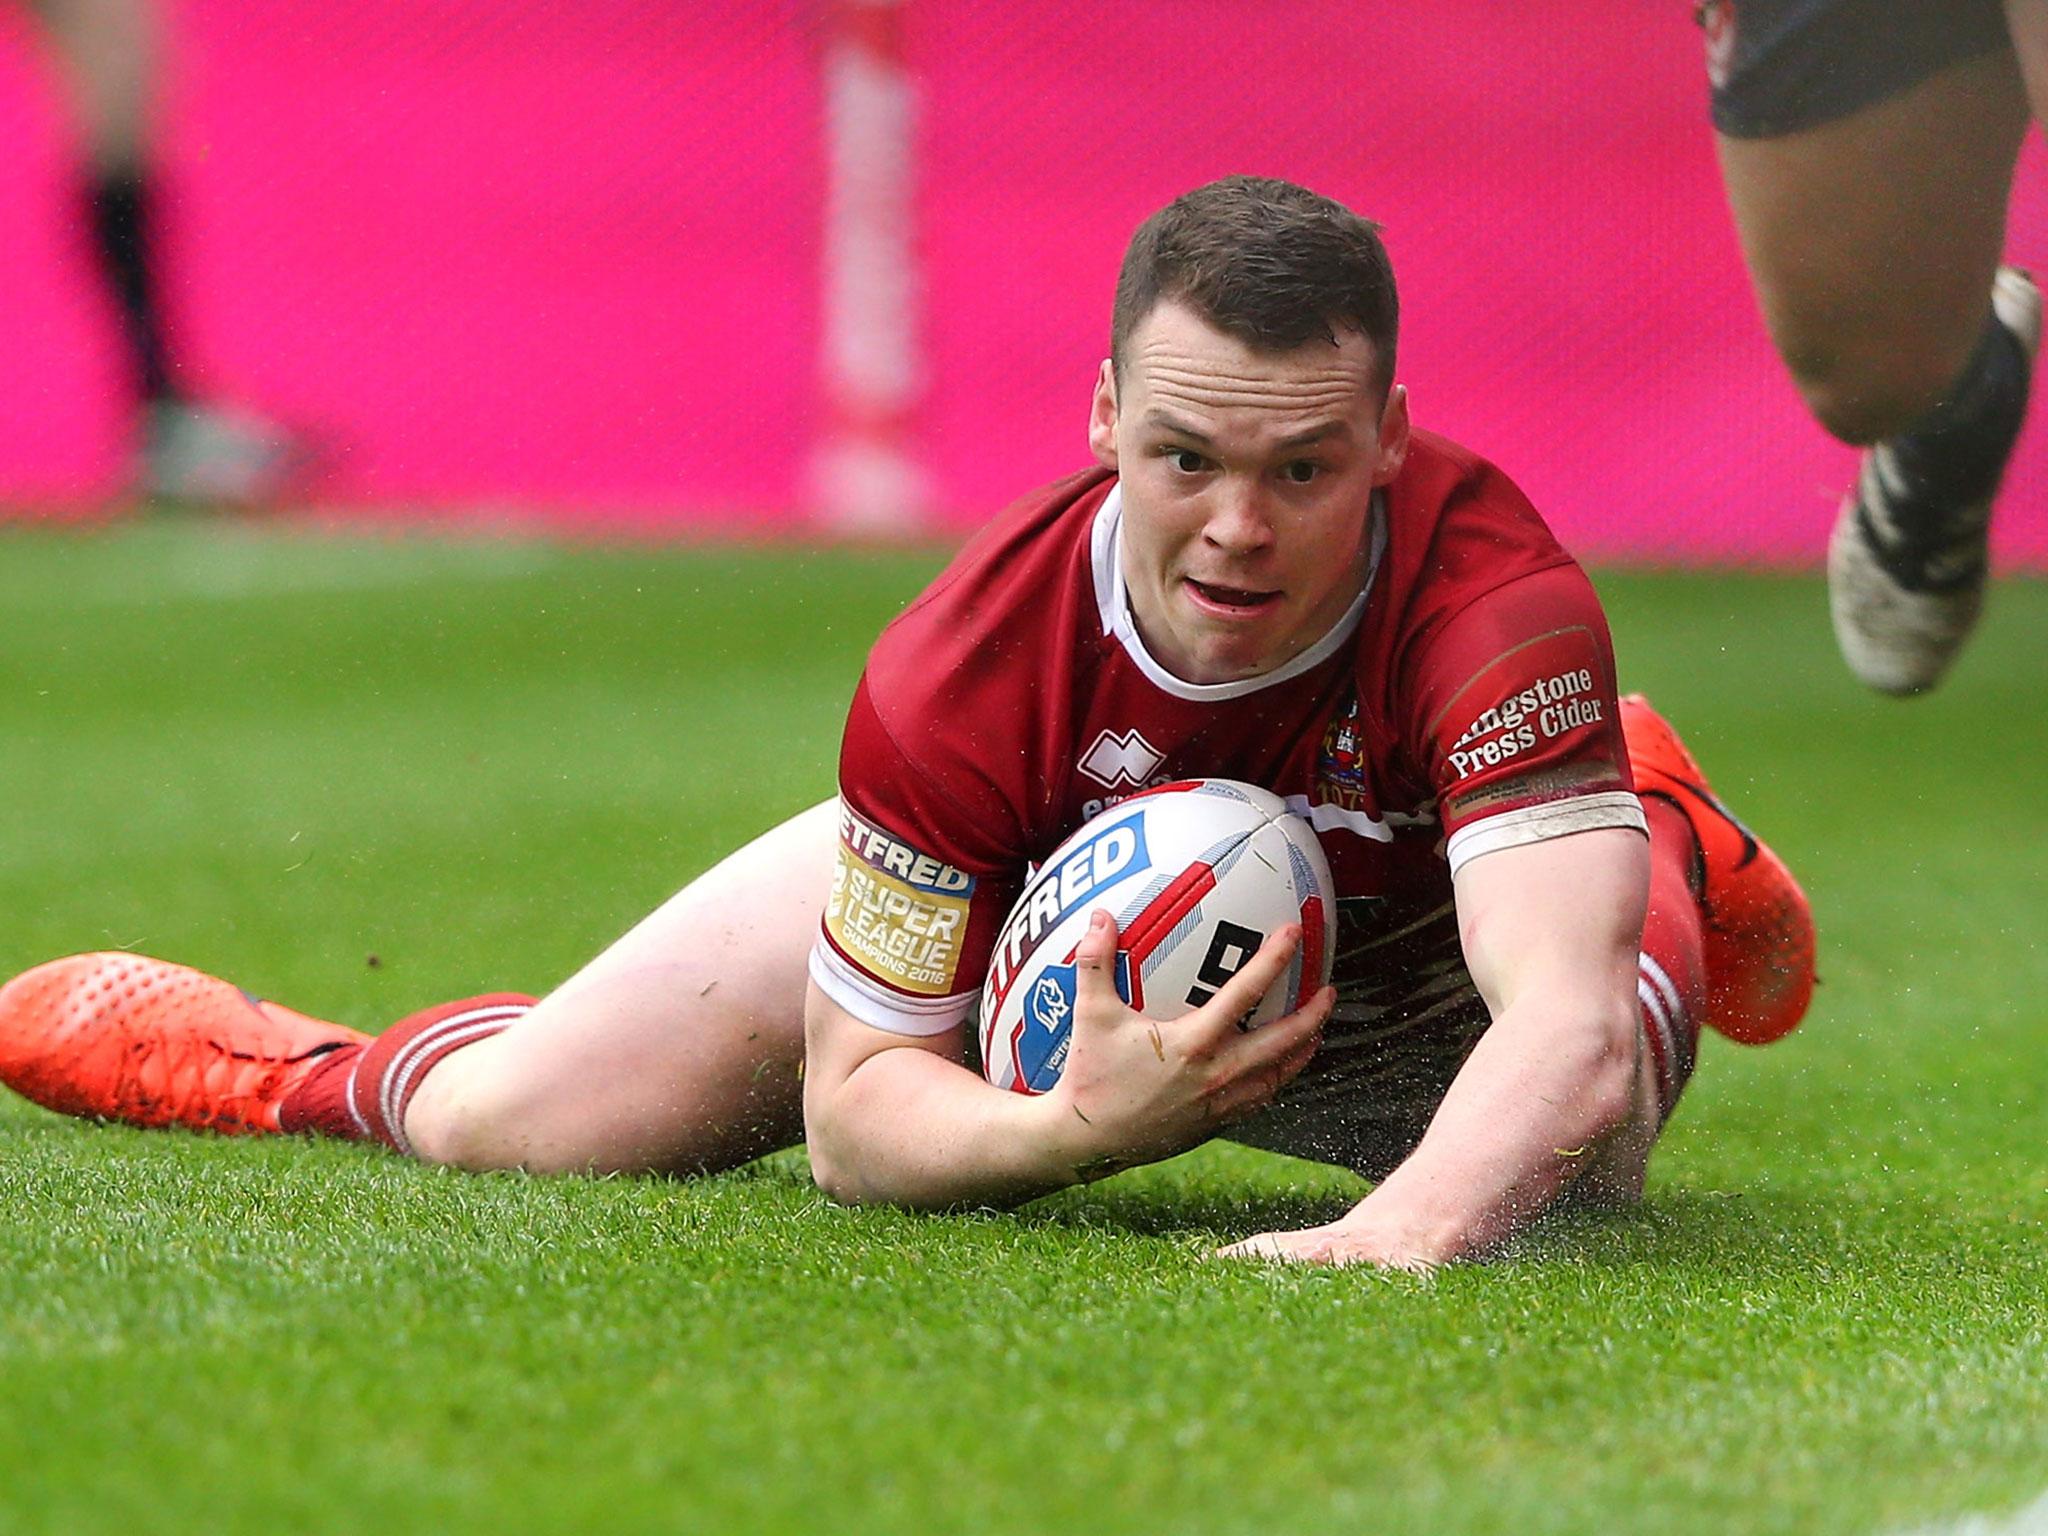 Liam Marshall scored a late try to clinch Wigan's victory over Wakefield